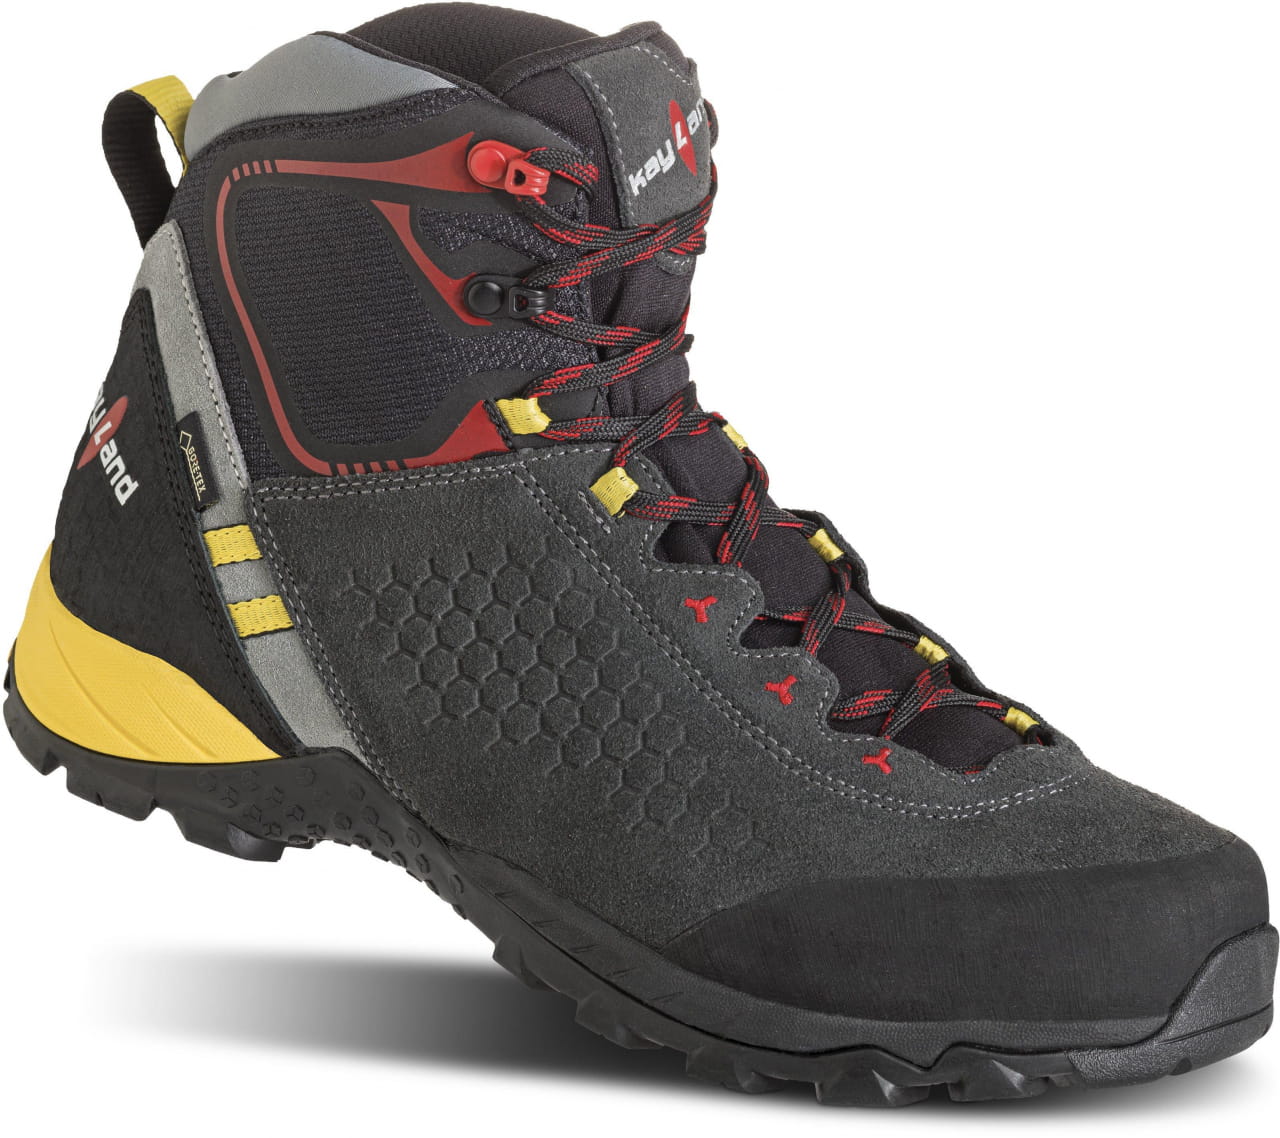 Chaussures de plein air pour hommes Kayland Inphinity Gtx